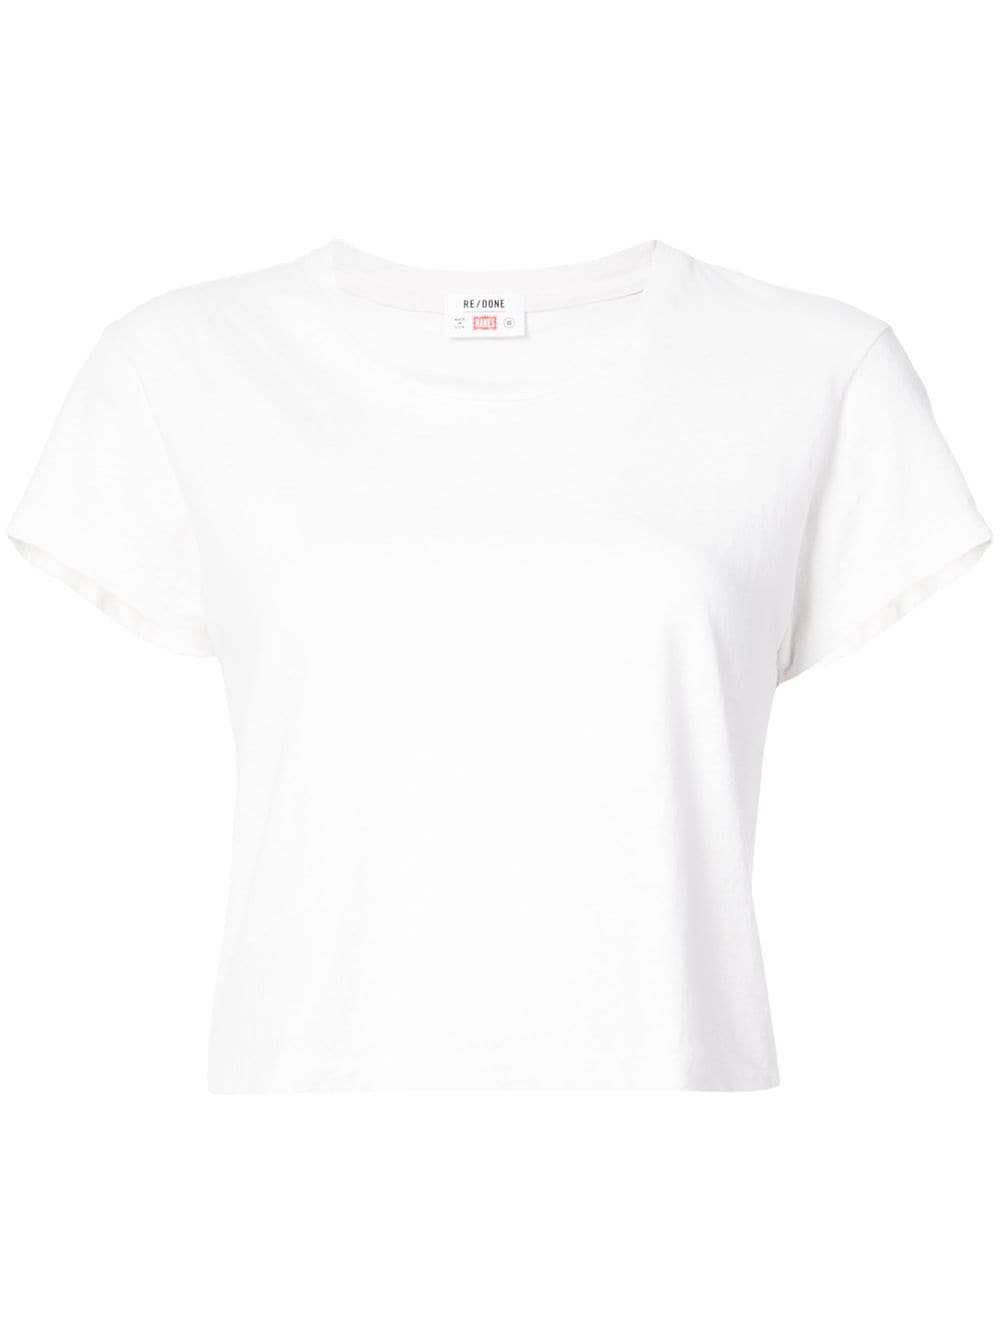 RE/DONE 1950s Boxy T-shirt - White von RE/DONE